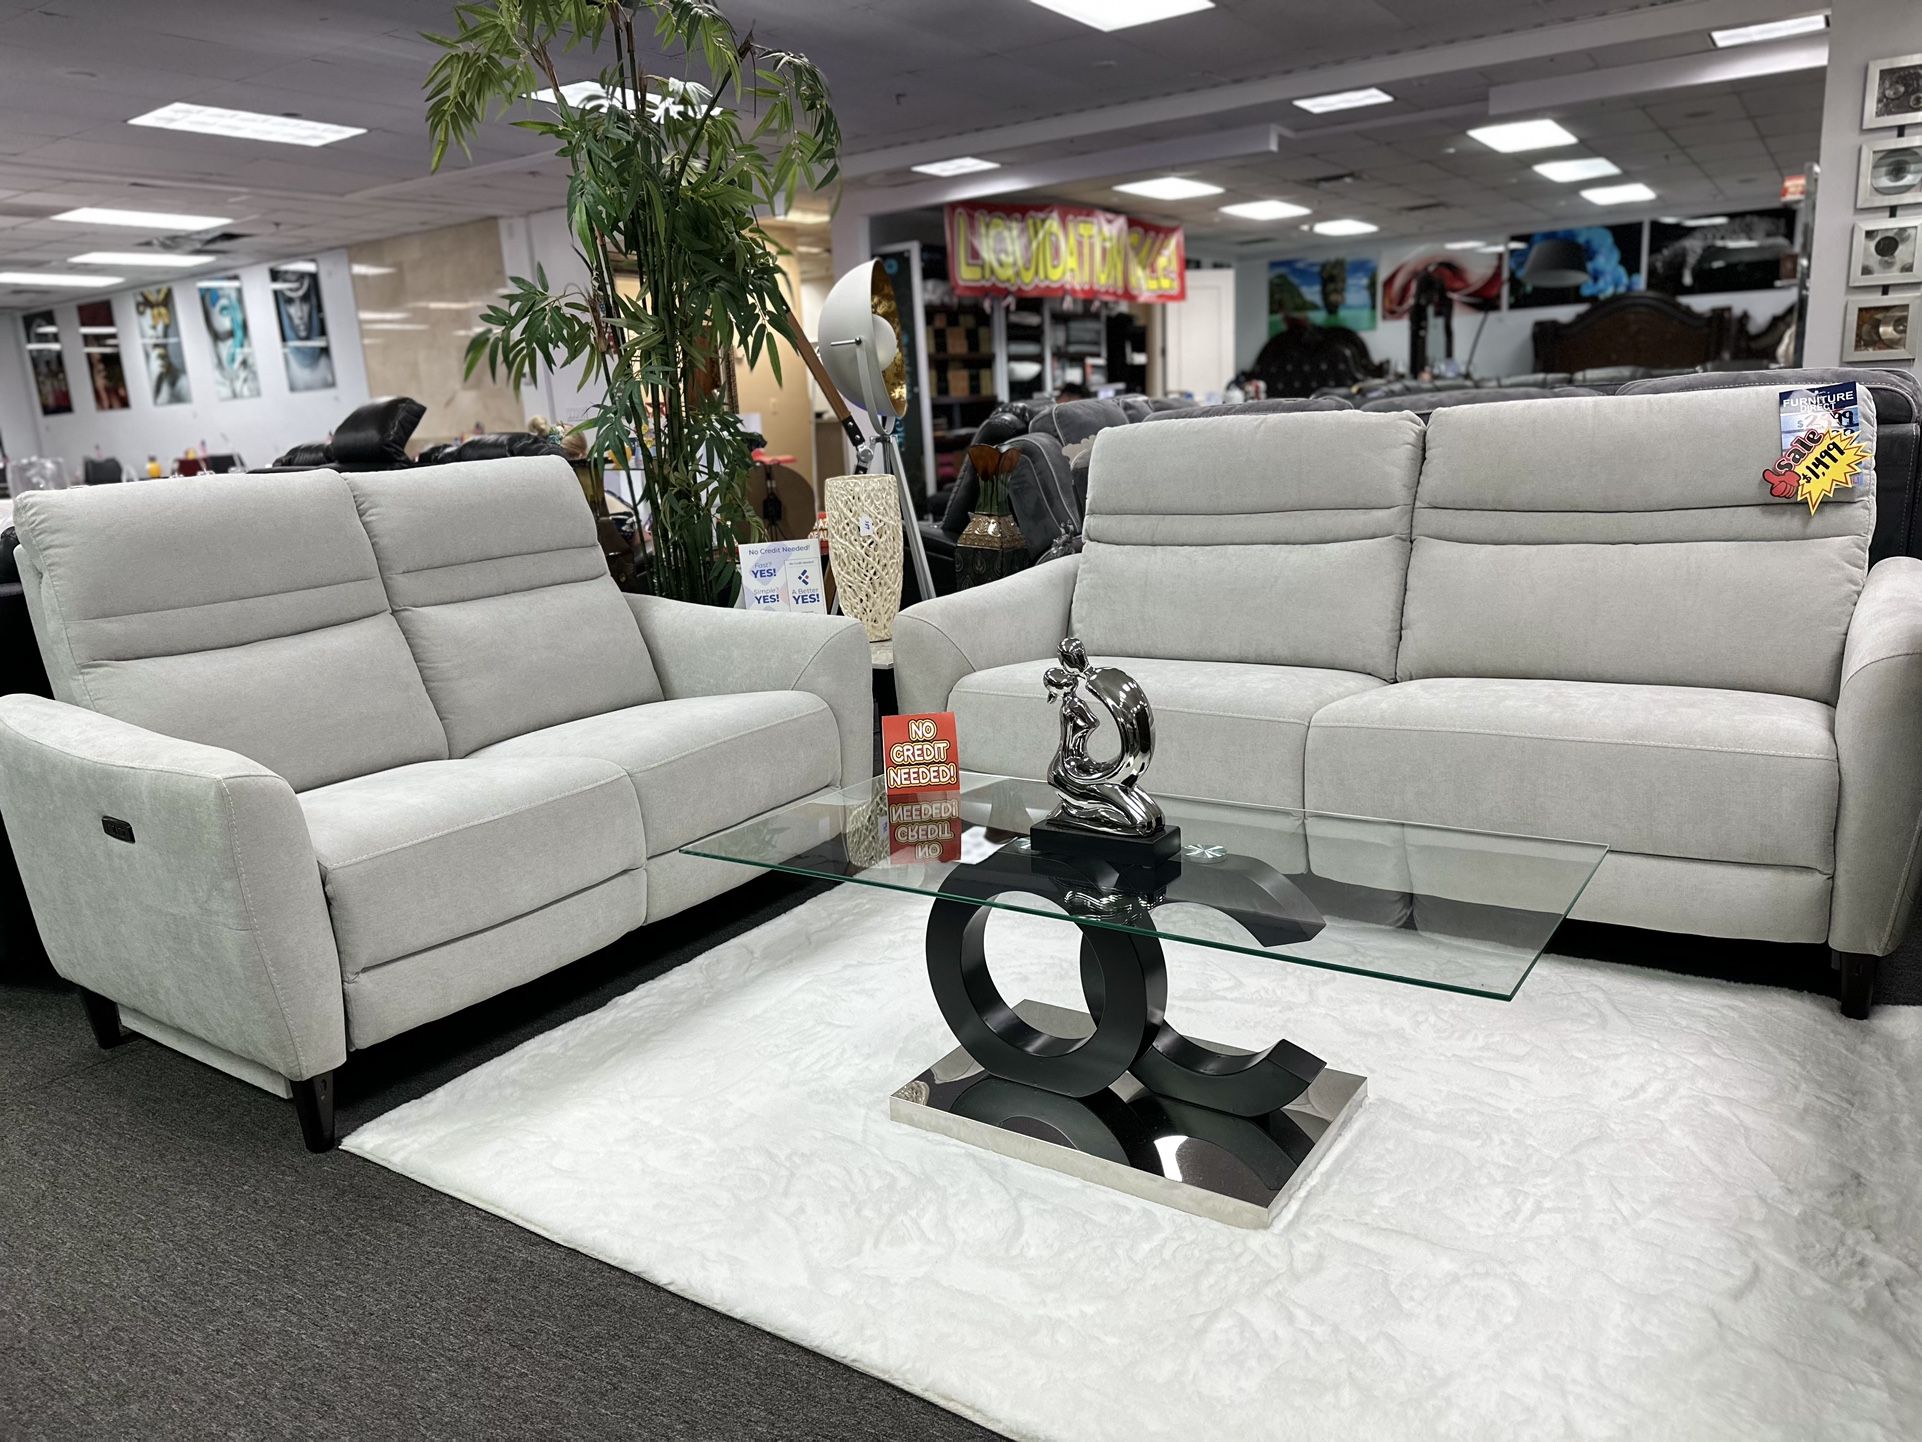 Labor Day Special Pwr Head And Foot Reclining Sofa And Loveseat Set Now 75% Off (Grey + Beige Is Available)!